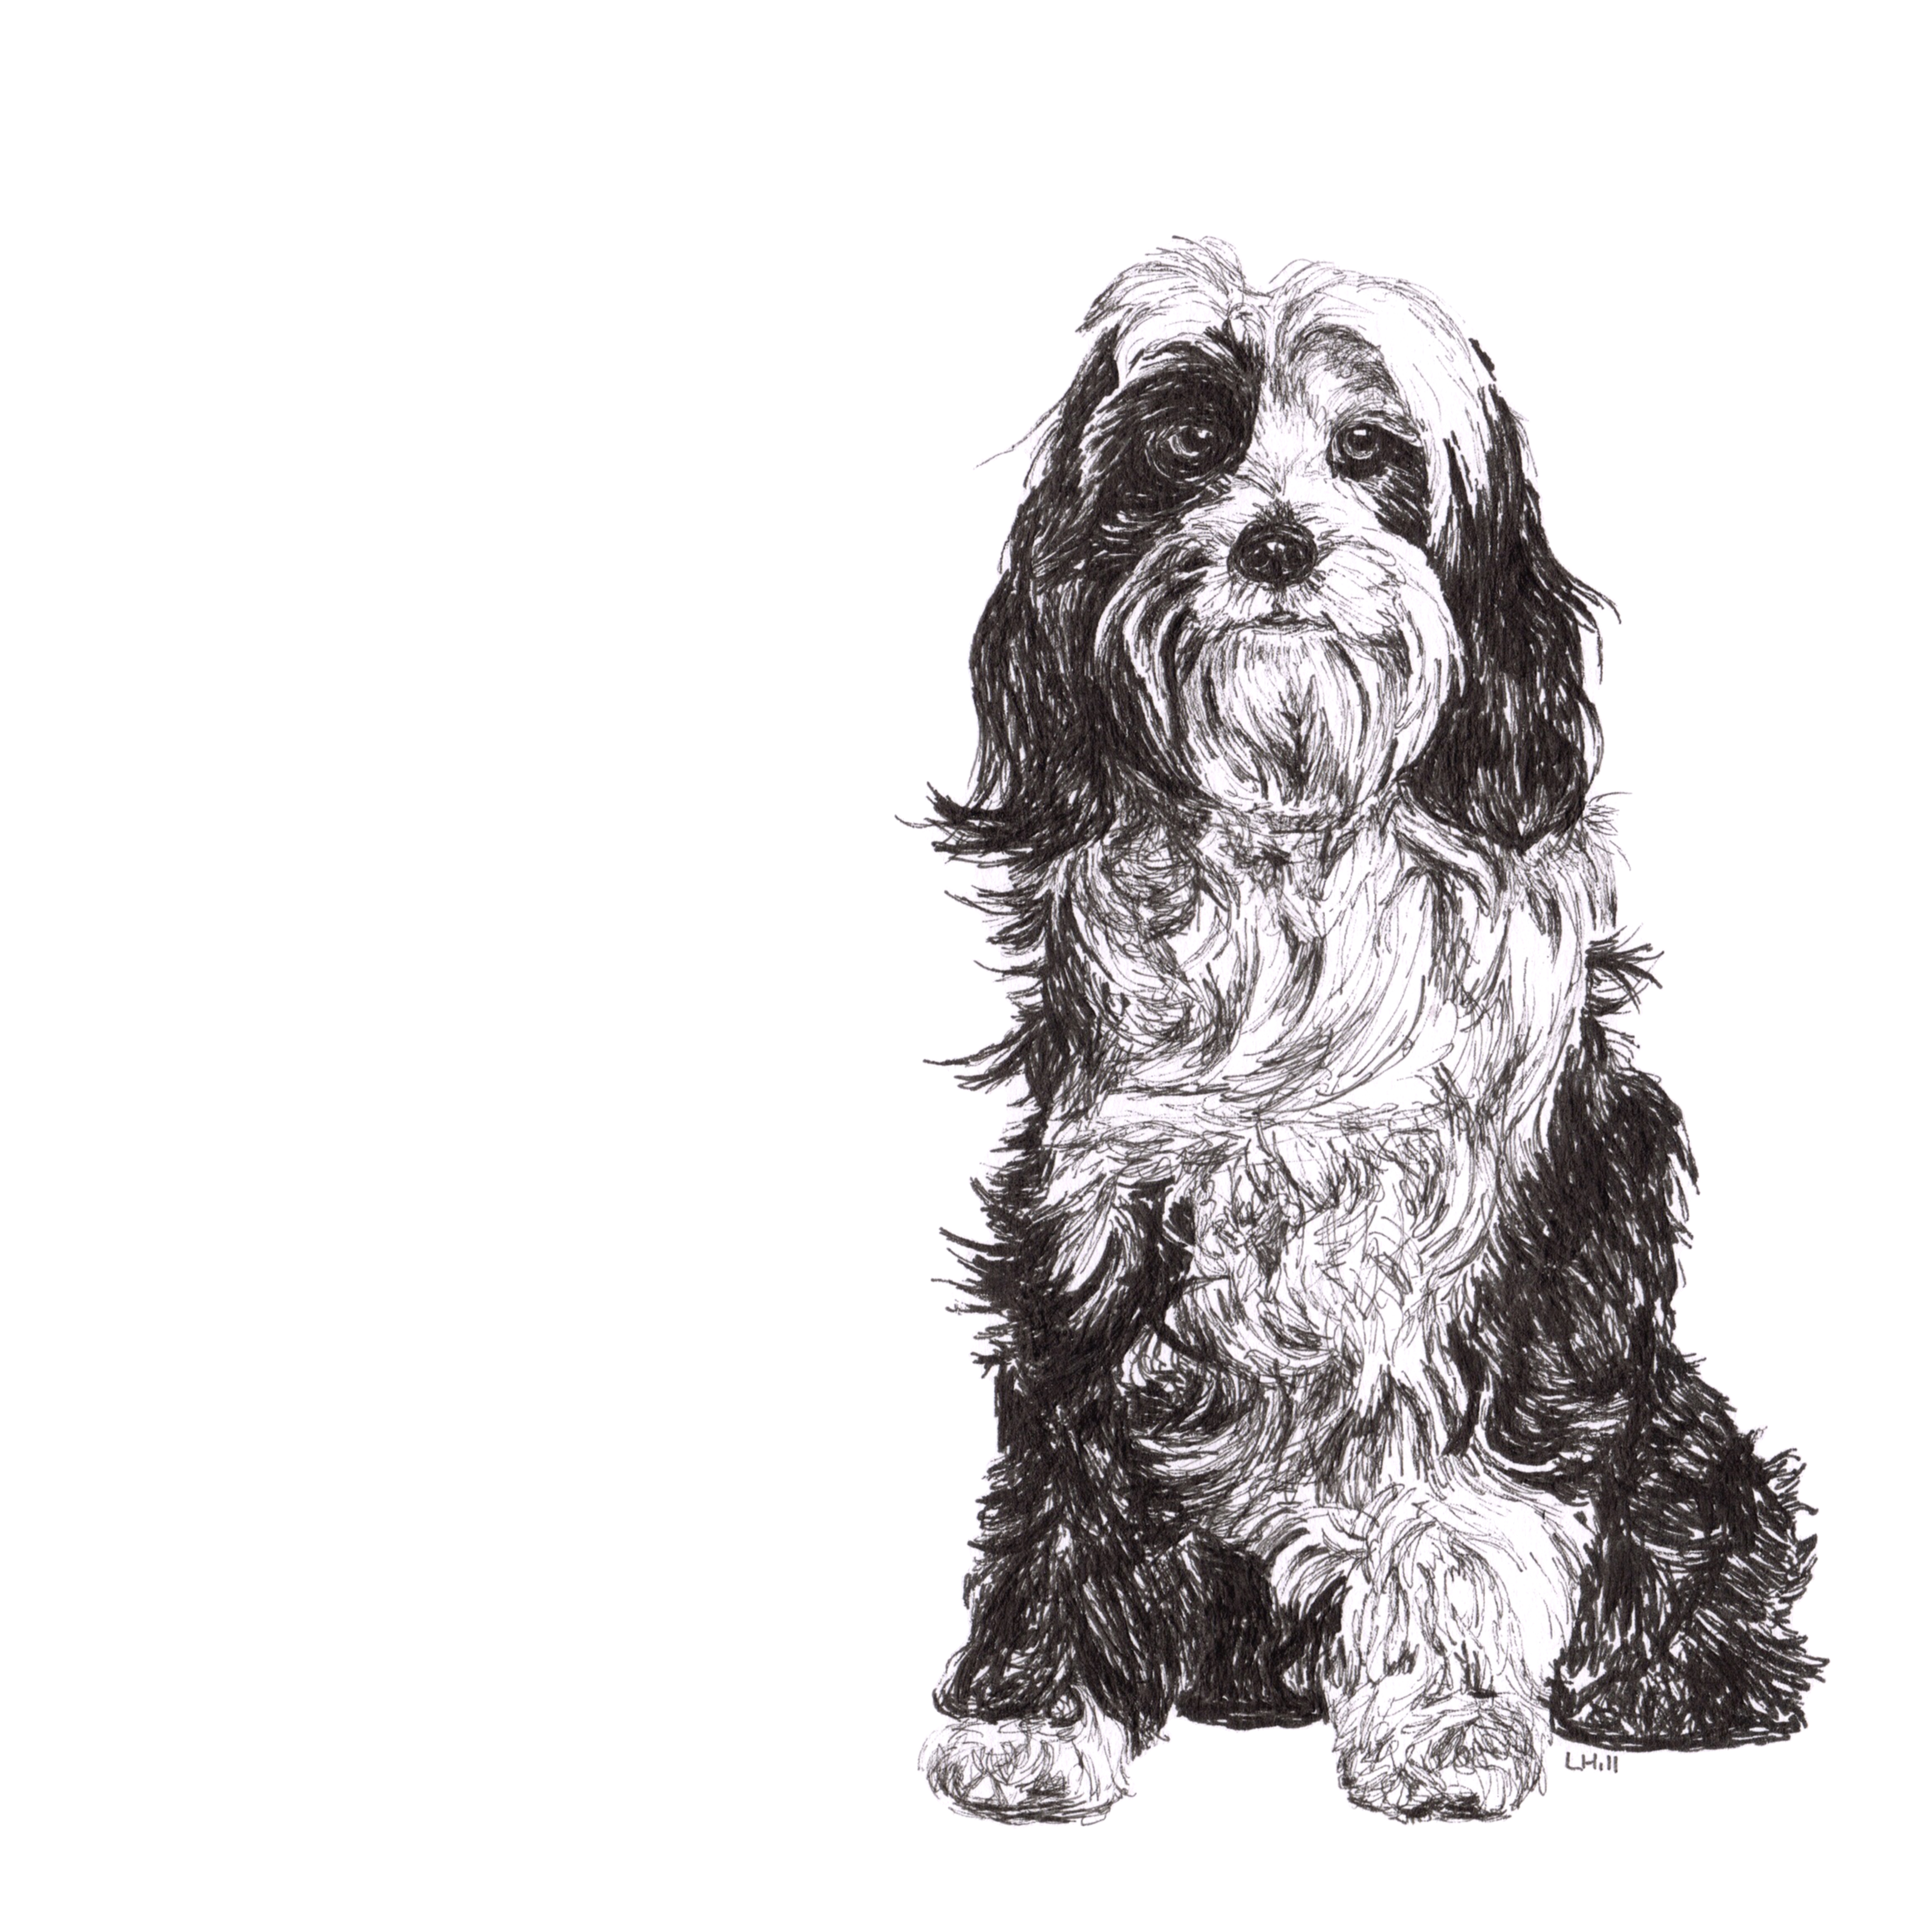 Tibetan Terrier pen and ink illustration by Louisa Hill